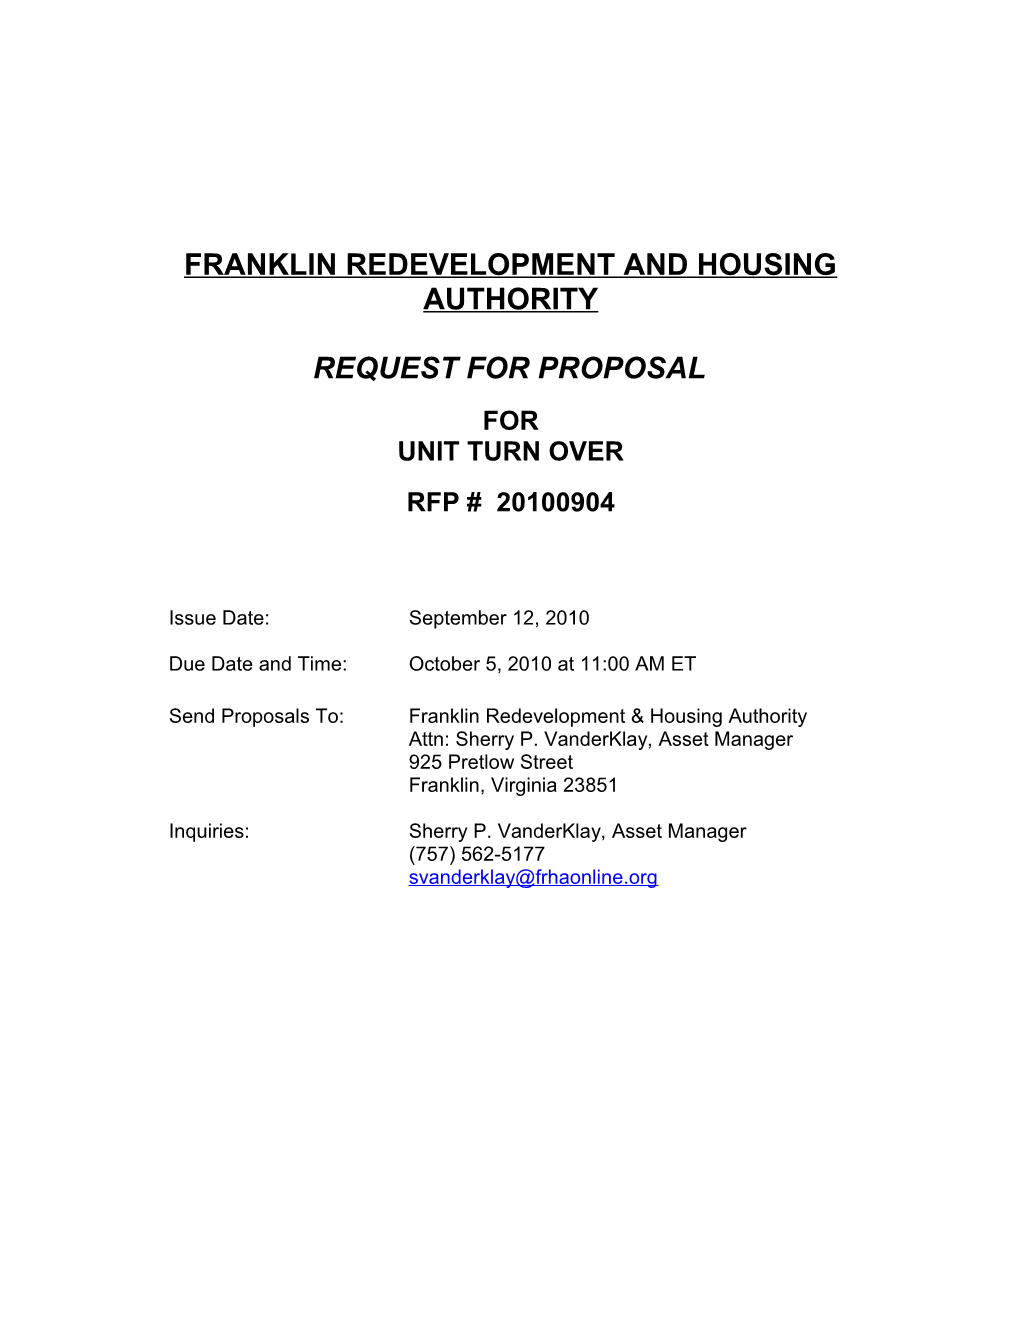 Franklin Redevelopment and Housing Authority